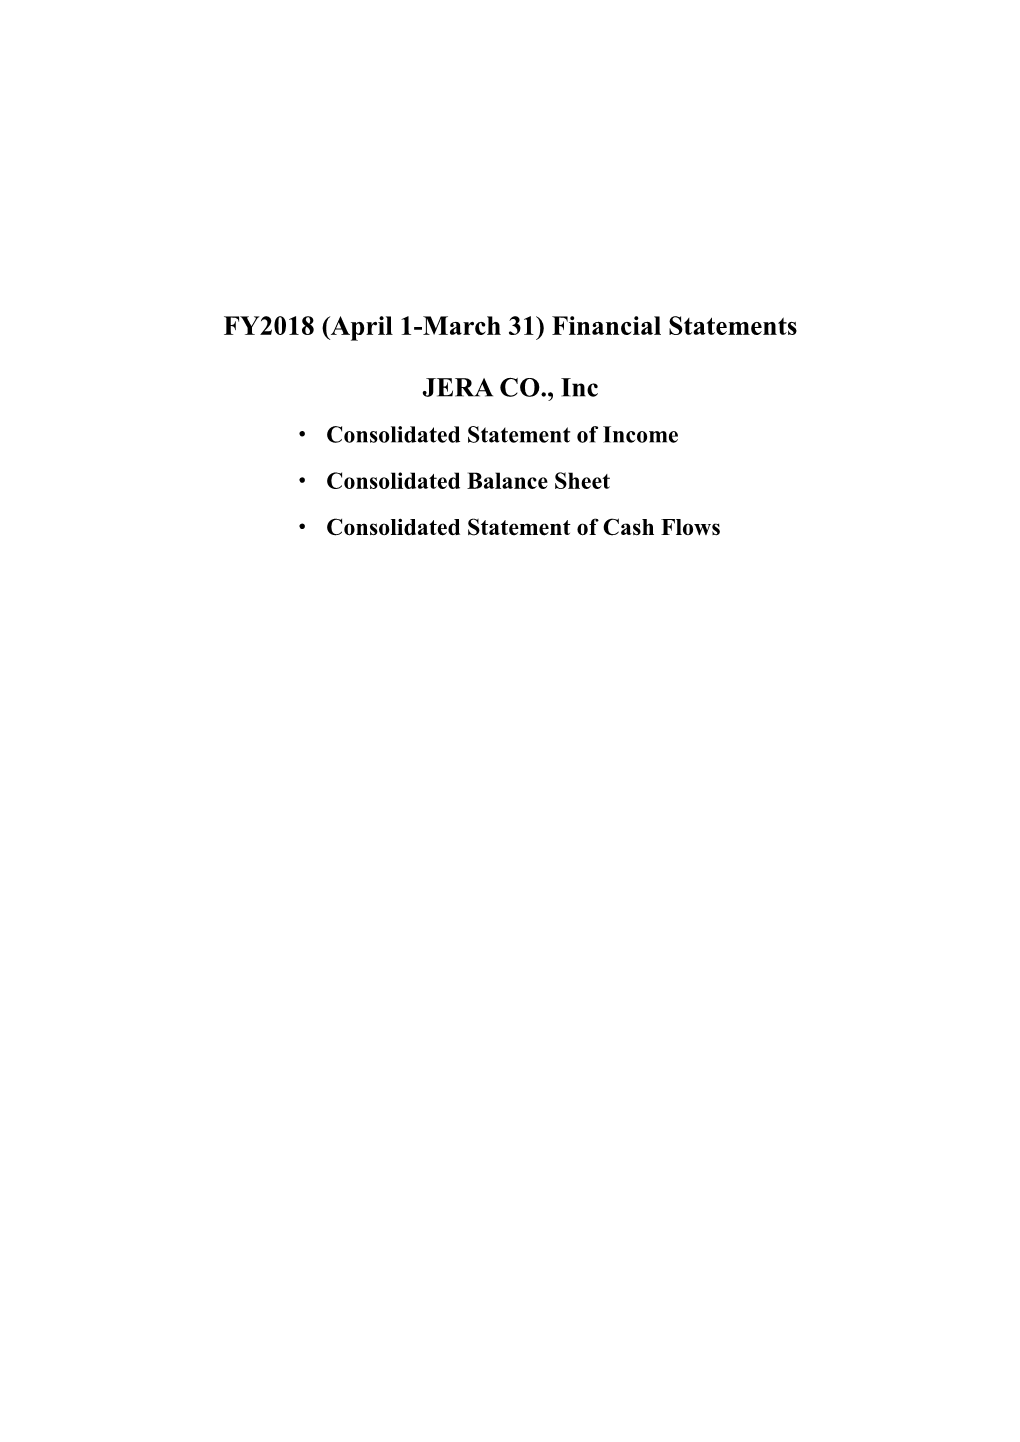 Statement of Income／Balance Sheet／Statement of Cash Flows（Consolidated）